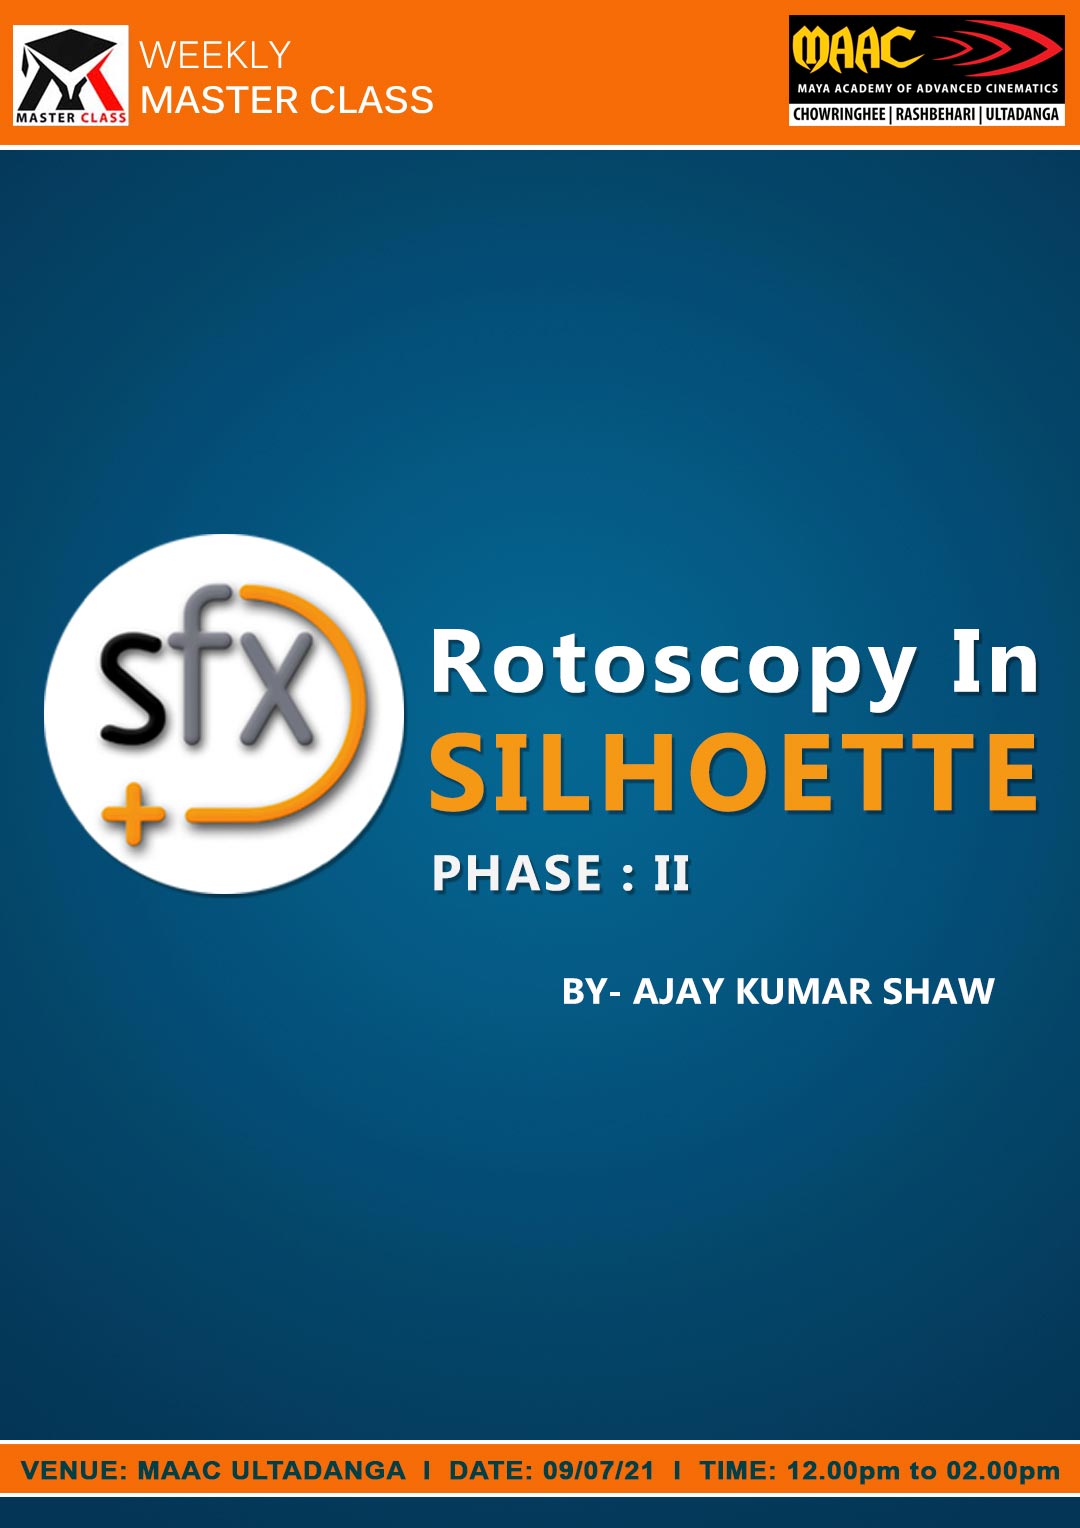 Weekly Master Class on Rotoscopy in Silhouette Phase 2